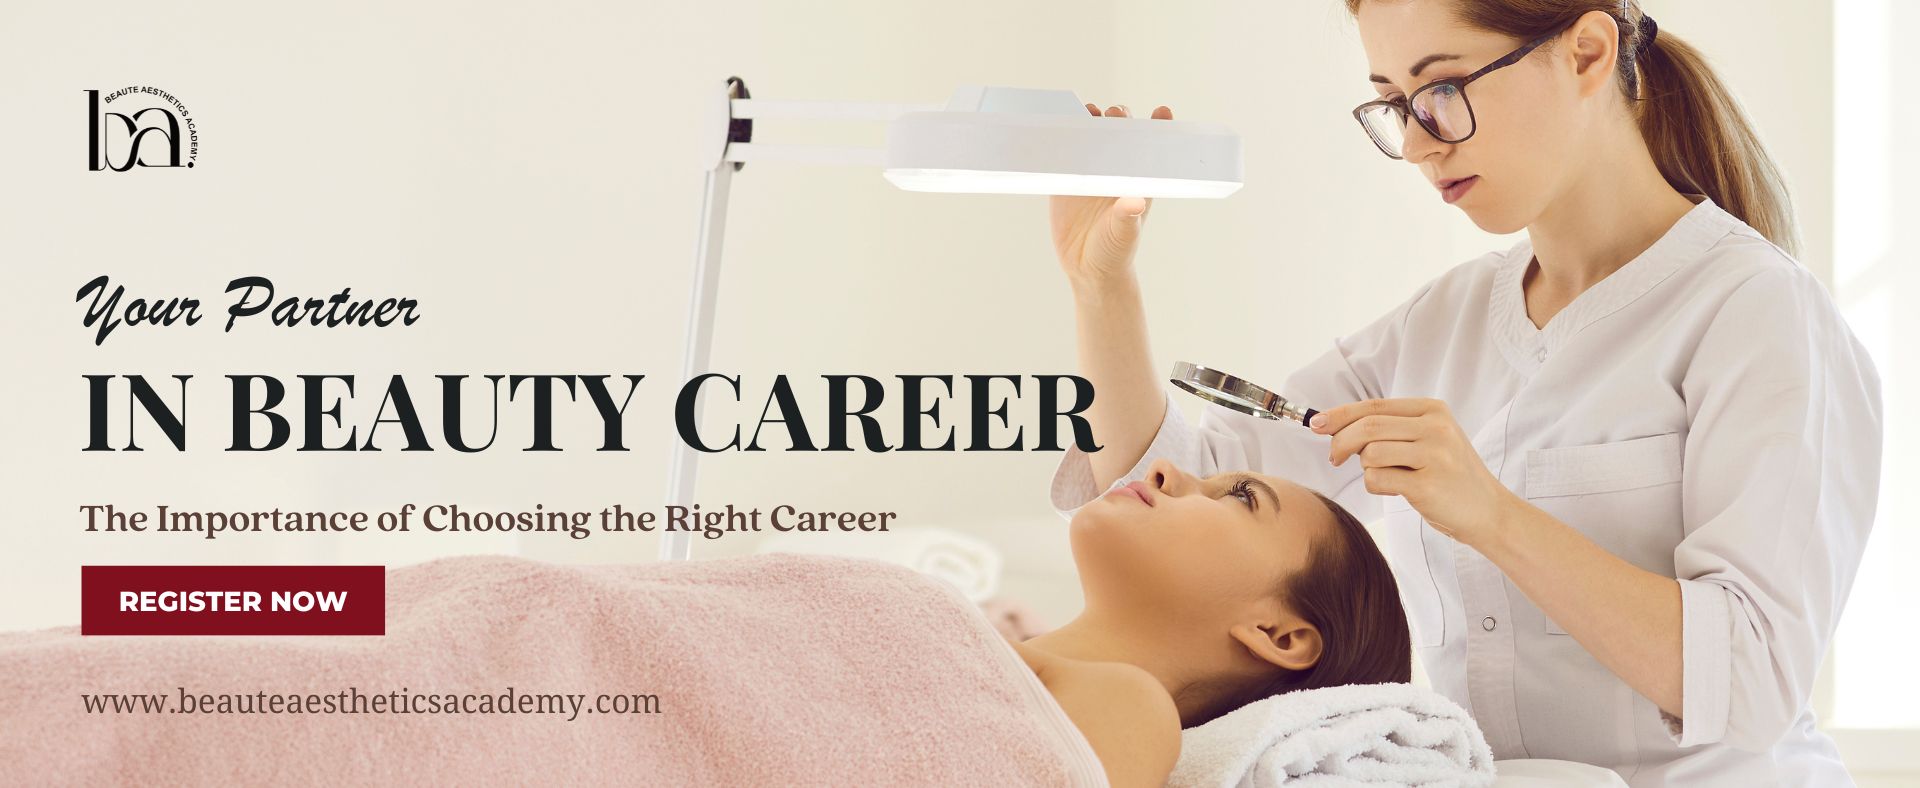 Importance of Choosing the Right Career with Beaute Aesthetics Academy